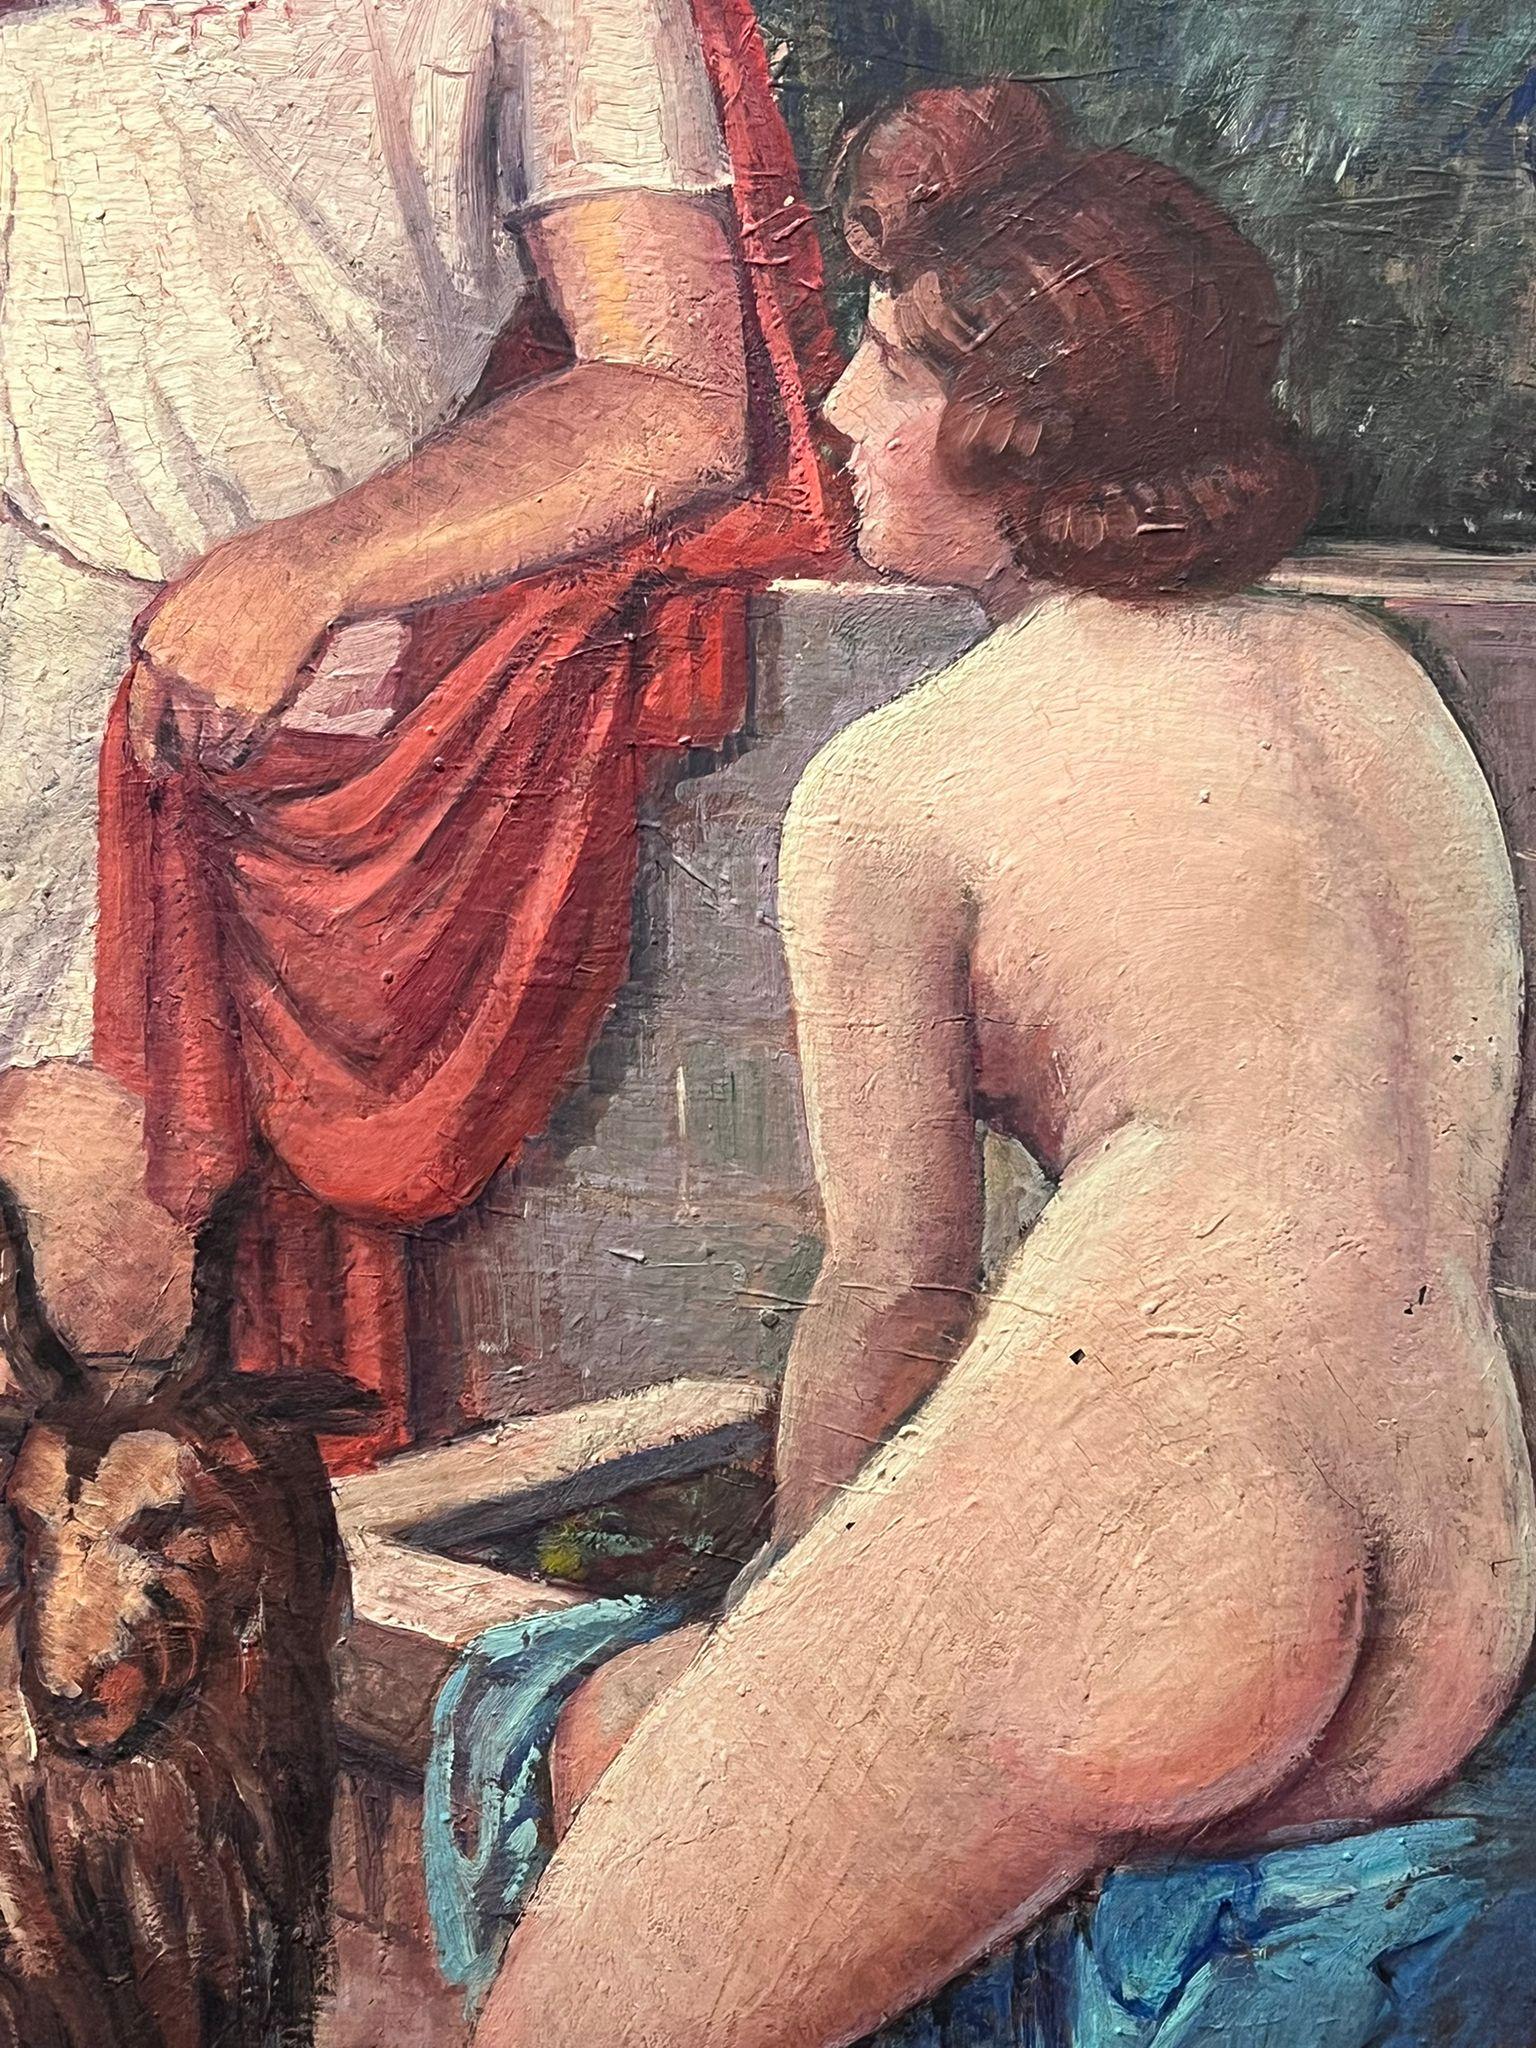 Shepherd with Flock and Nude Lady by Fountain
Italian School, circa 1900's
indistinctly signed, 'R. Bertholio'?
signed oil on canvas, unframed
canvas: 46 x 29  inches
provenance: private collection, France
condition: good and sound condition